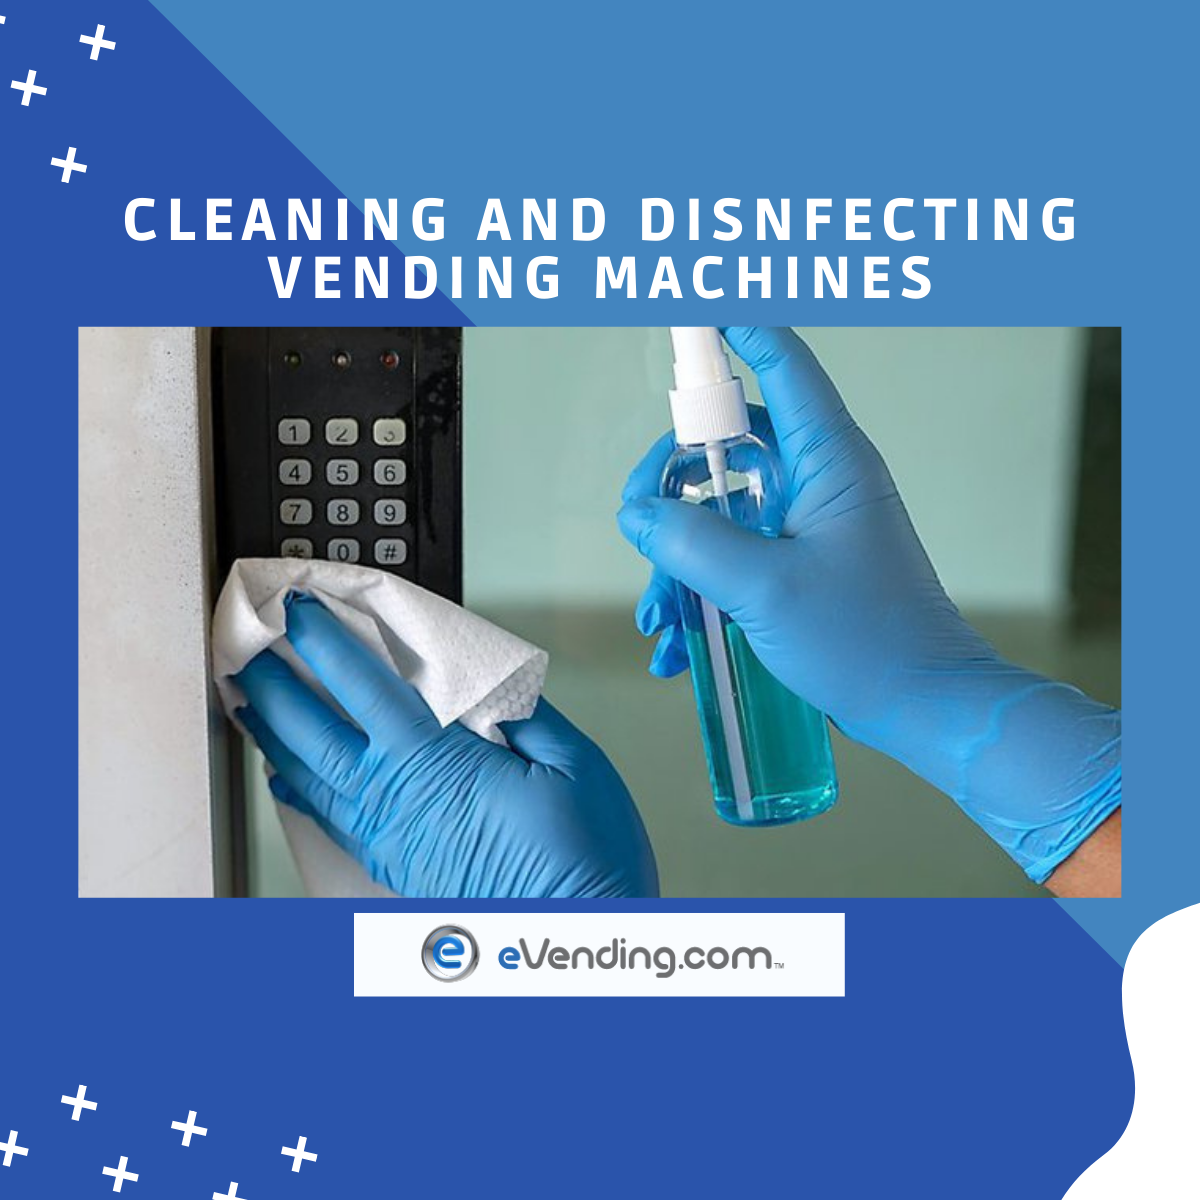 BEST PRACTICES FOR CLEANING AND DISNFECTING VENDING MACHINES